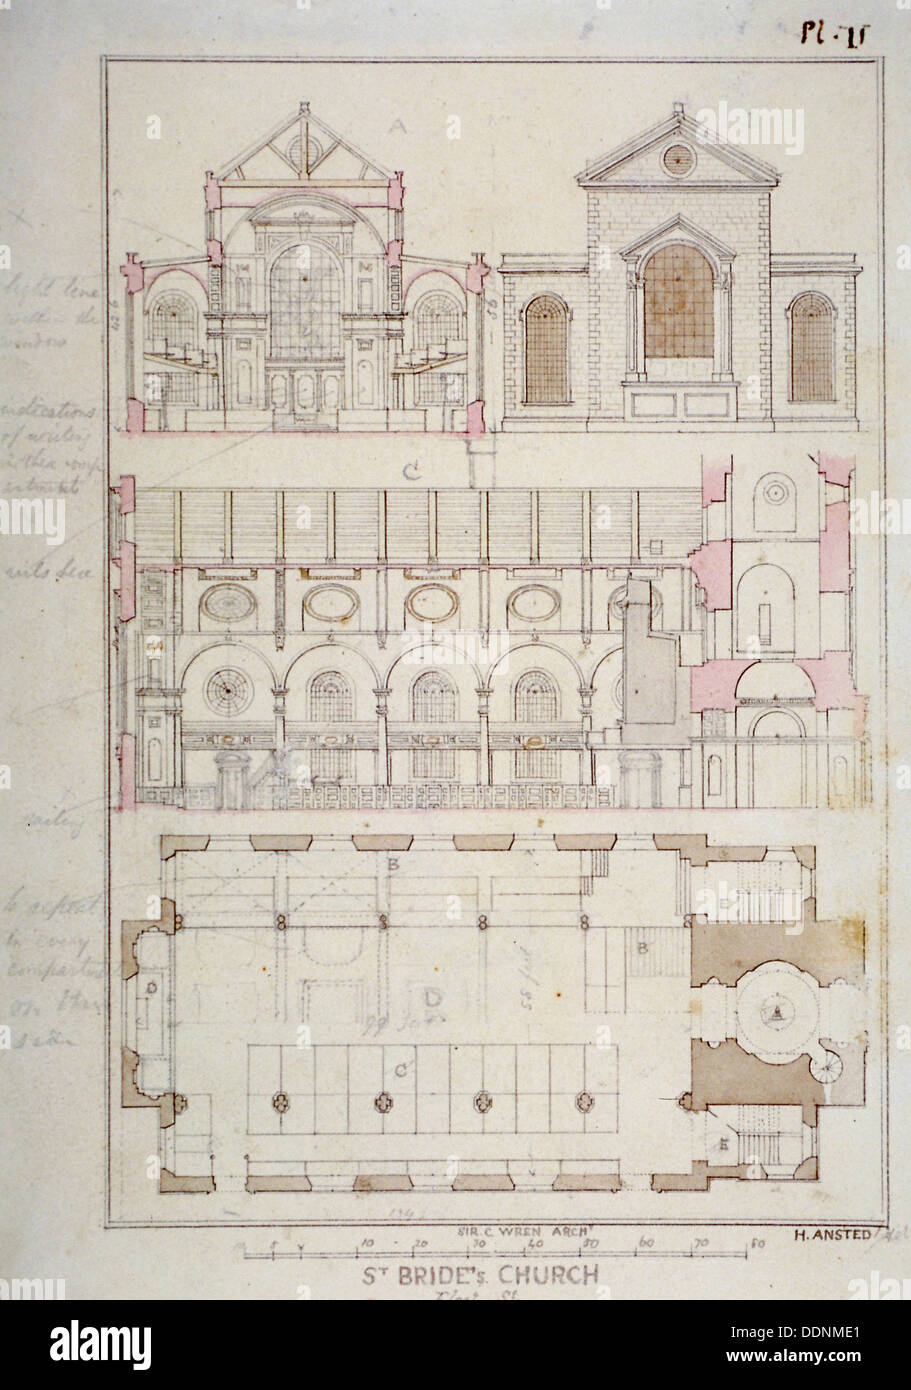 Section, elevation and ground plan of St Bride's Church, Fleet Street, City of London, 1840. Artist: H Ansted Stock Photo